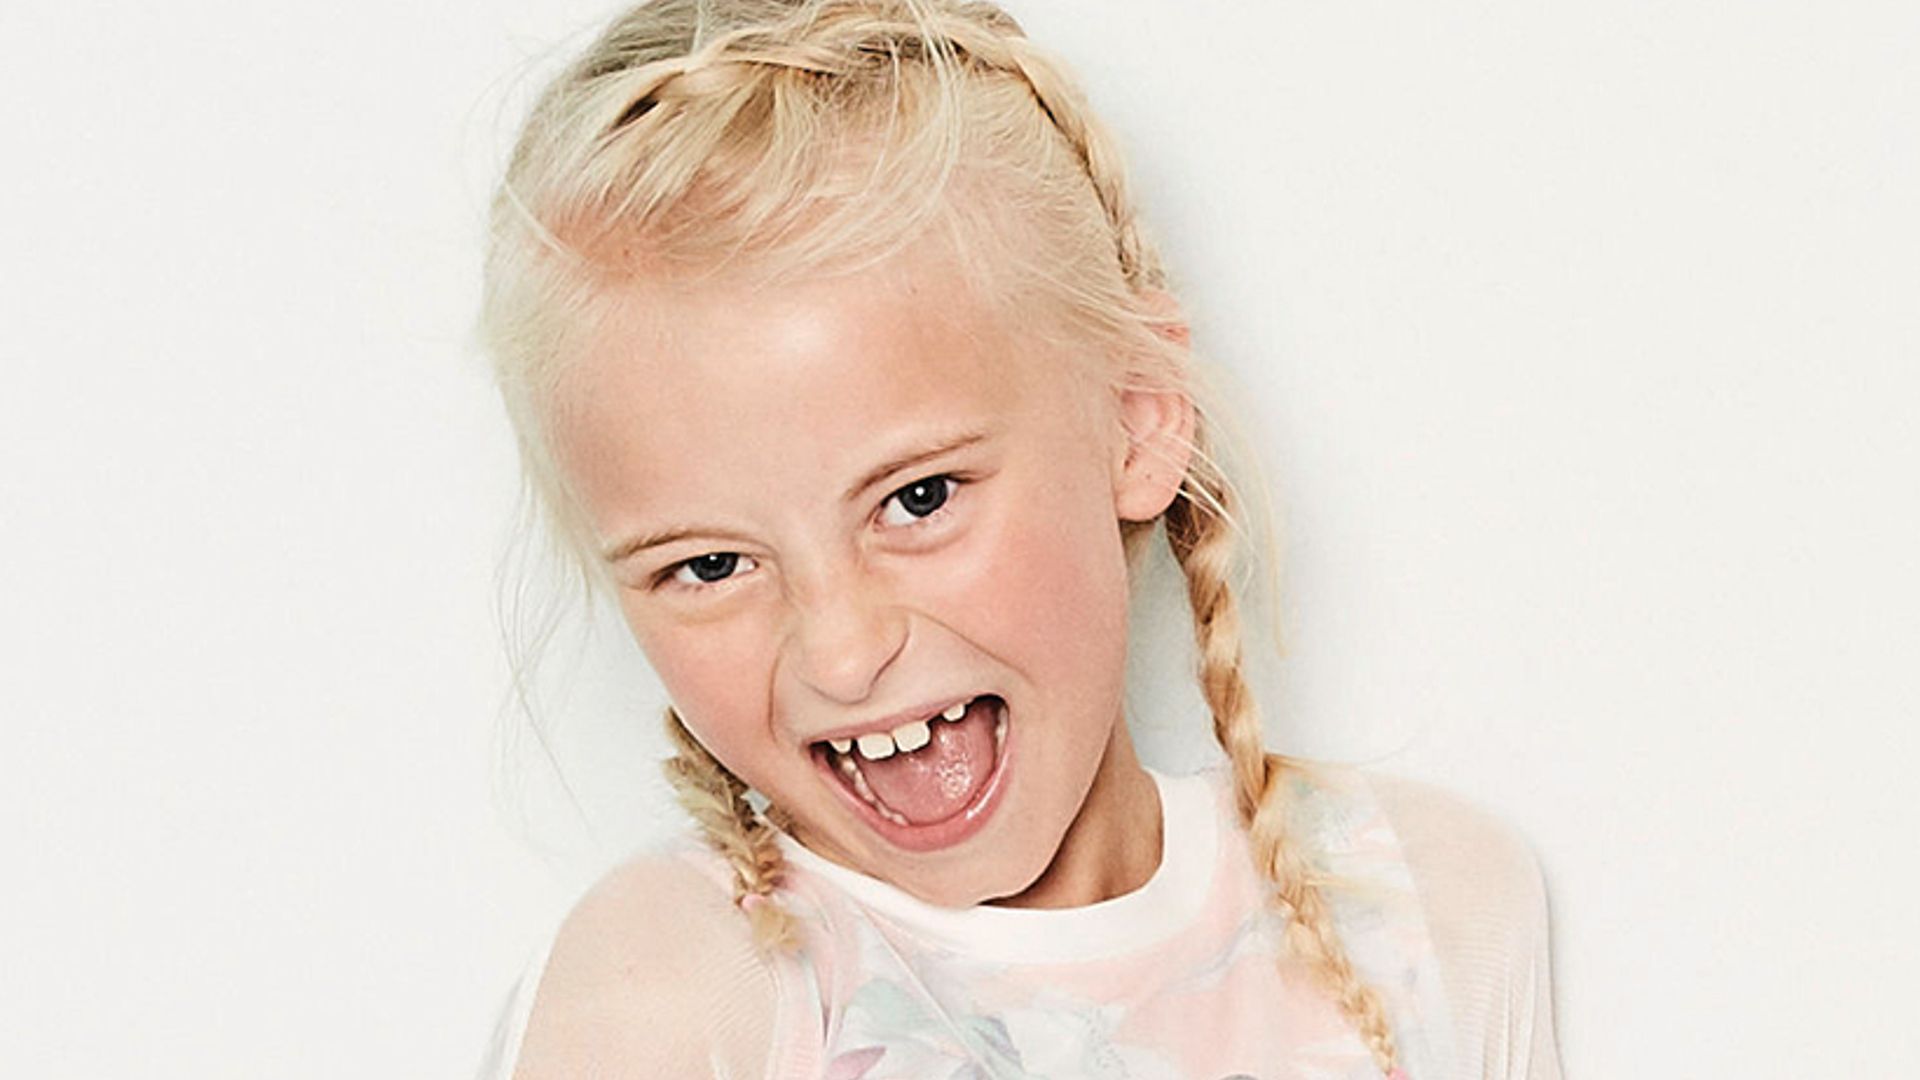 The inspiring story behind River Island's new seven-year-old double amputee model